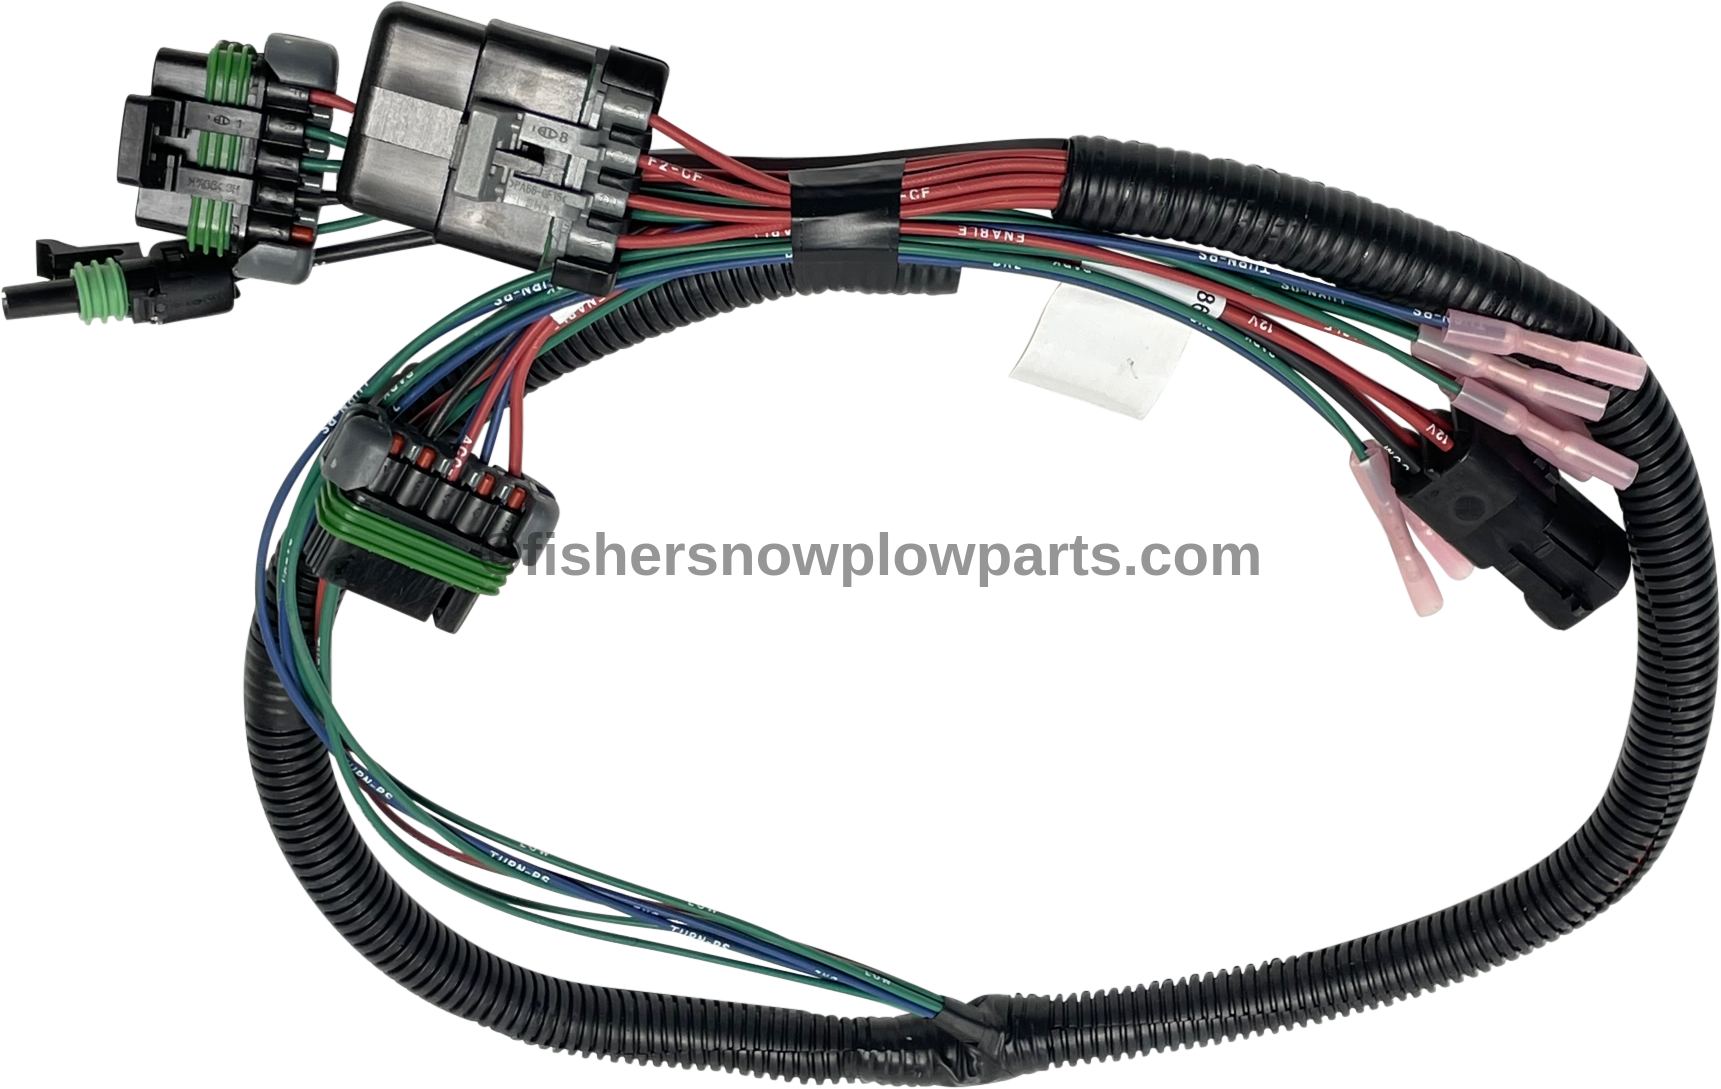 69986 - FISHER - WESTERN - BLIZZARD - SNOWEX SNOWPLOWS GENUINE REPLACEMENT  PART - 2015 - CURRENT DODGE 2500/3500/4500/5500 PLUG IN HARNESS. PLUGS INTO  PORTS B & C ON ISOLATION MODULE.